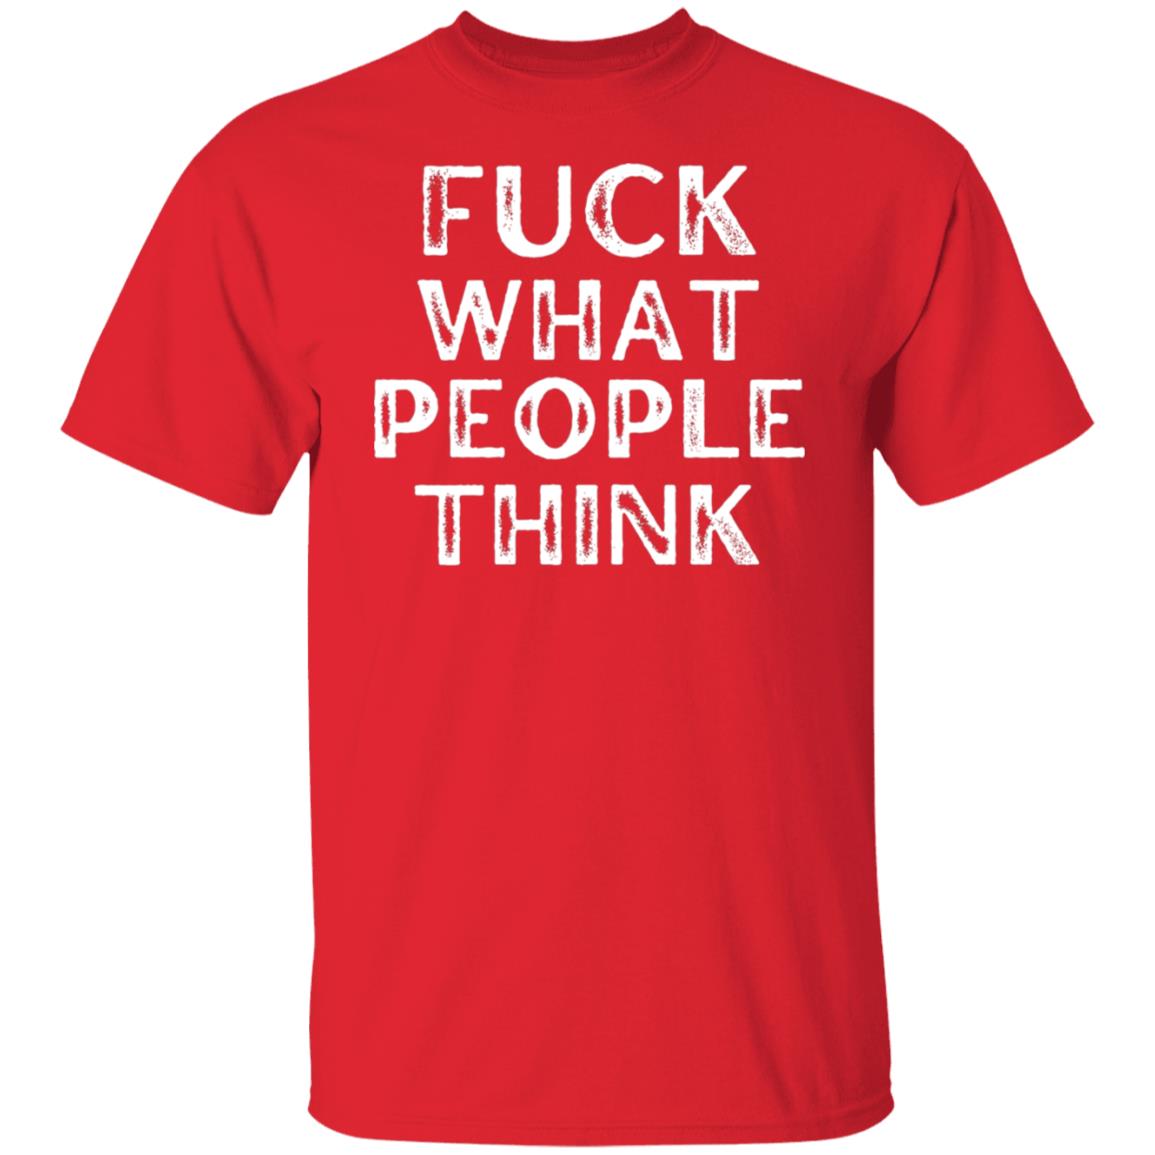 F#CK What People Think Free Spirit Open Minded Free Thinker Shirt T-Shirt